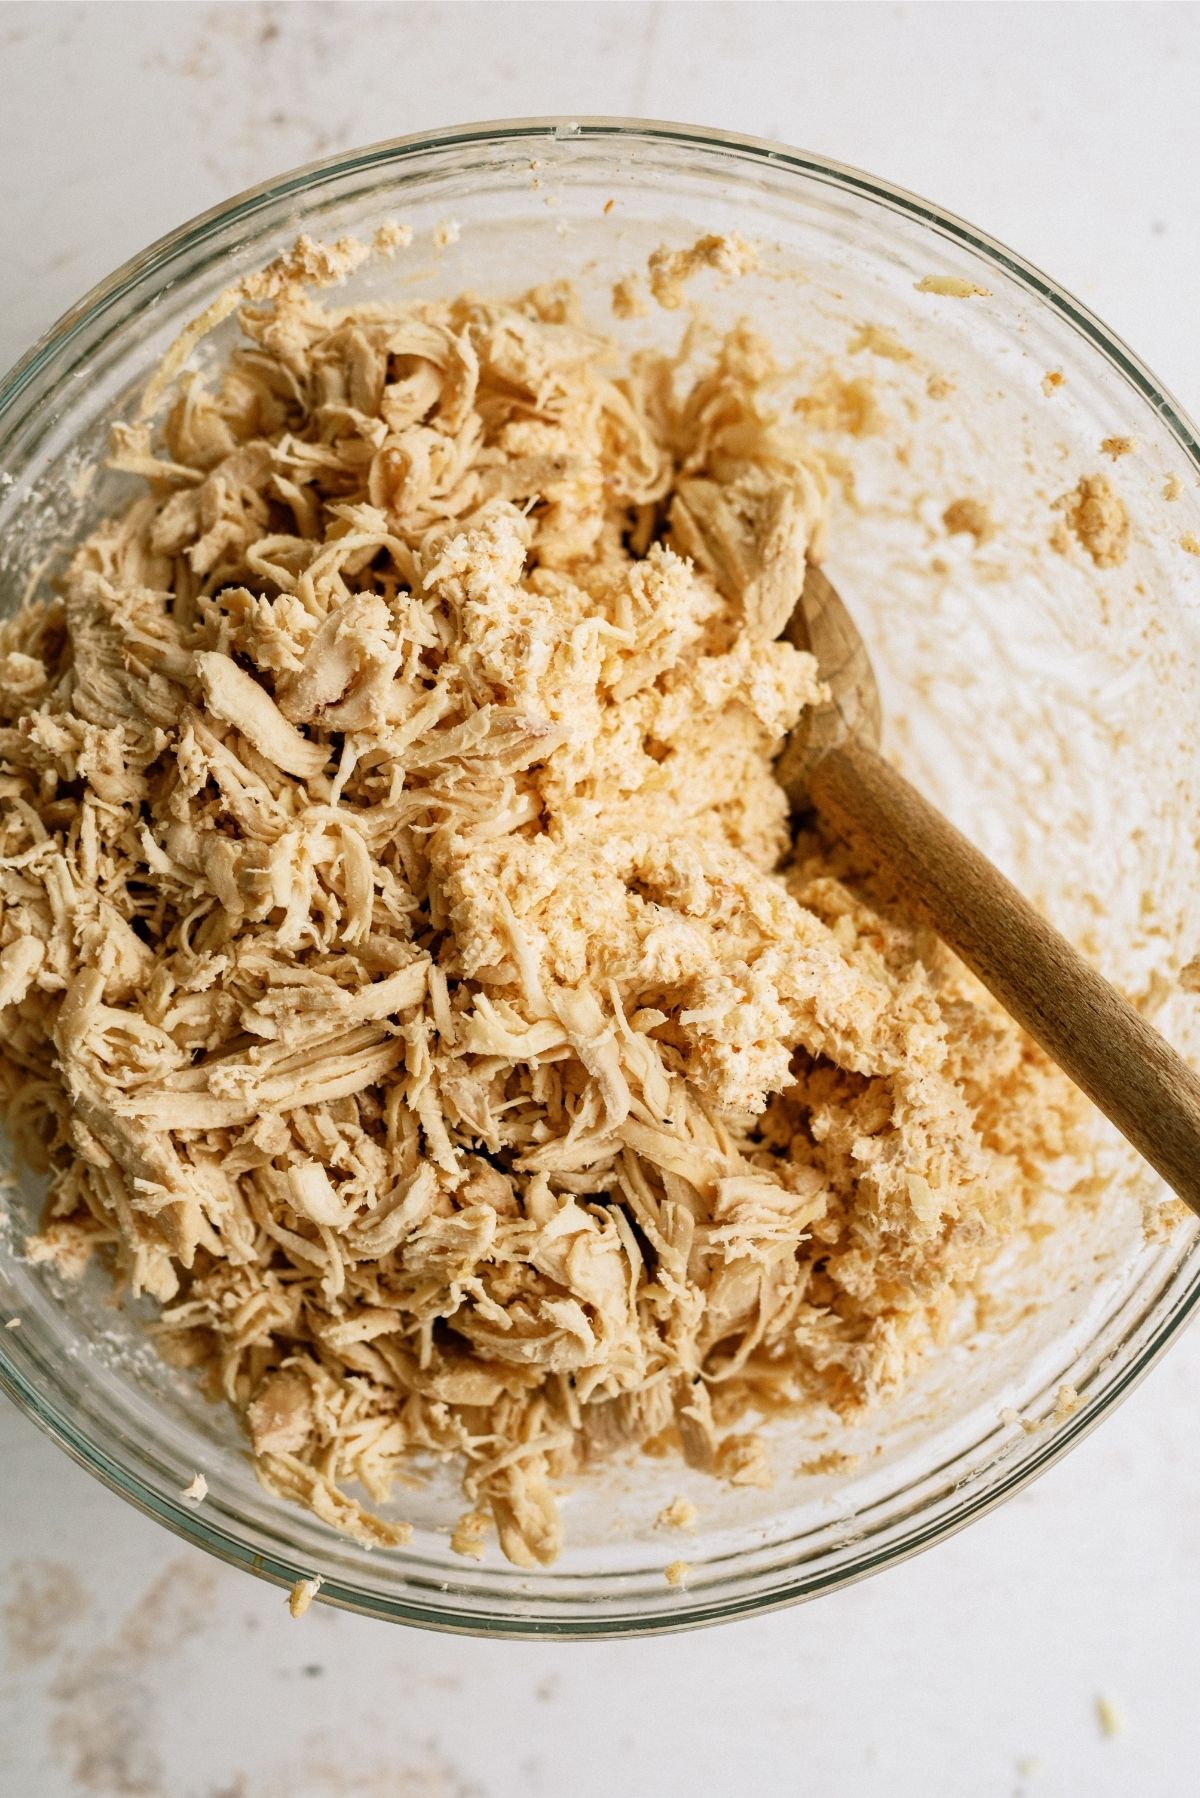 Shredded Chicken mixture in a glass bowl for Chimichangas